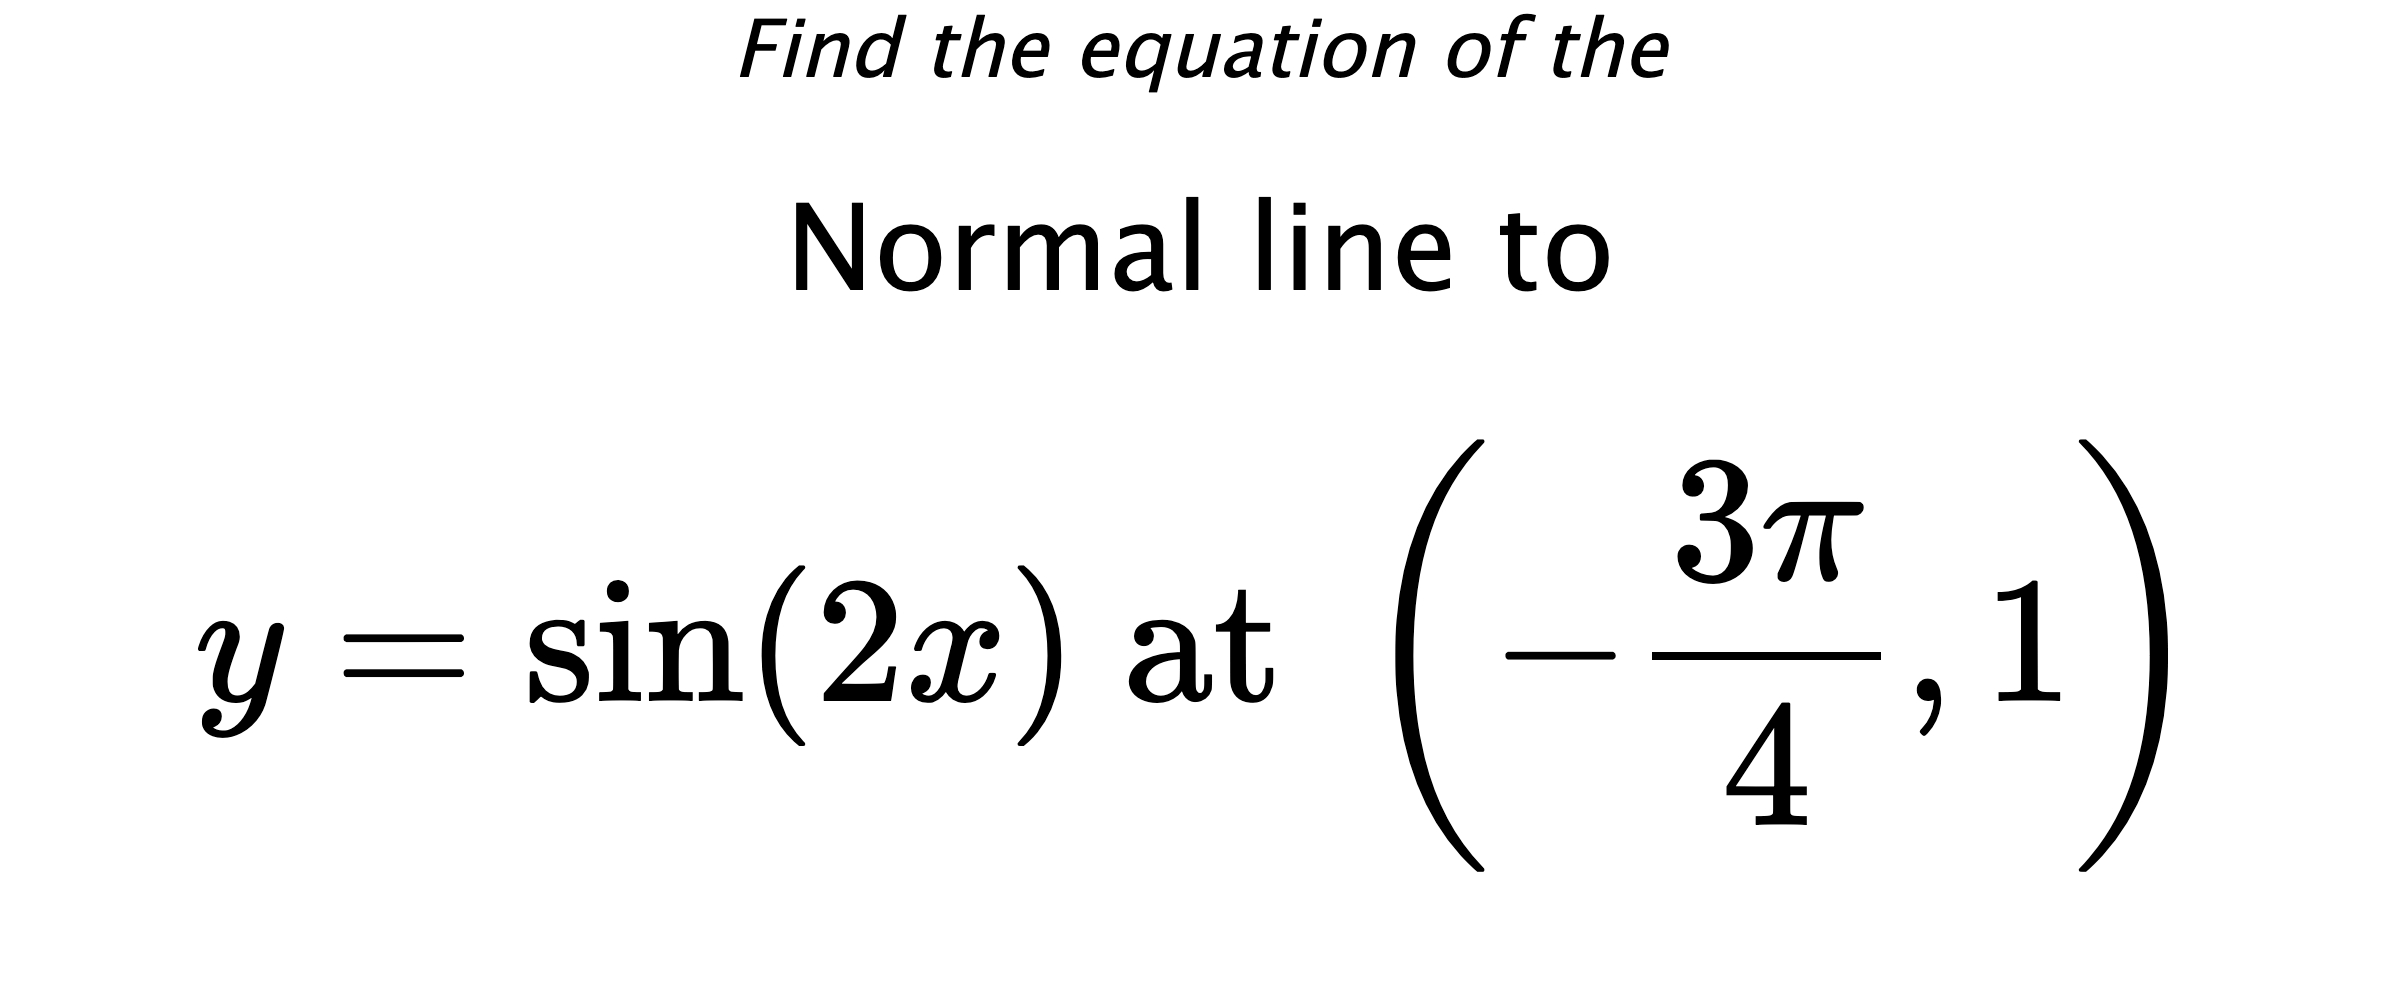 Find the equation of the Normal line to $$ y=\sin(2x) \text{ at } \left(-\frac{3\pi}{4},1\right) $$